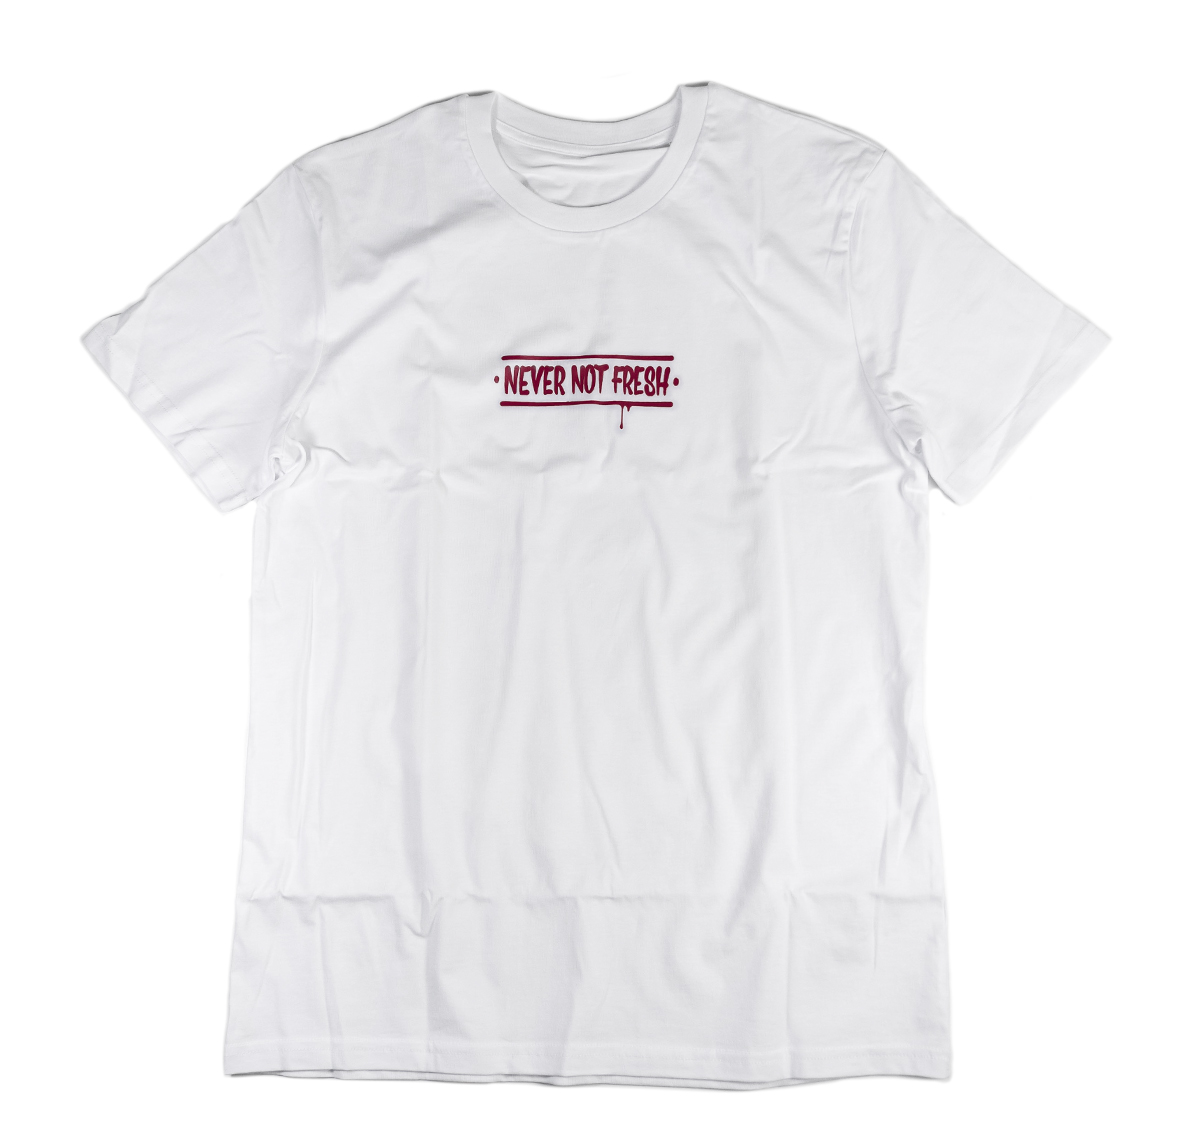 NOMAD Never Not Fresh Shirt - Boogie - White front